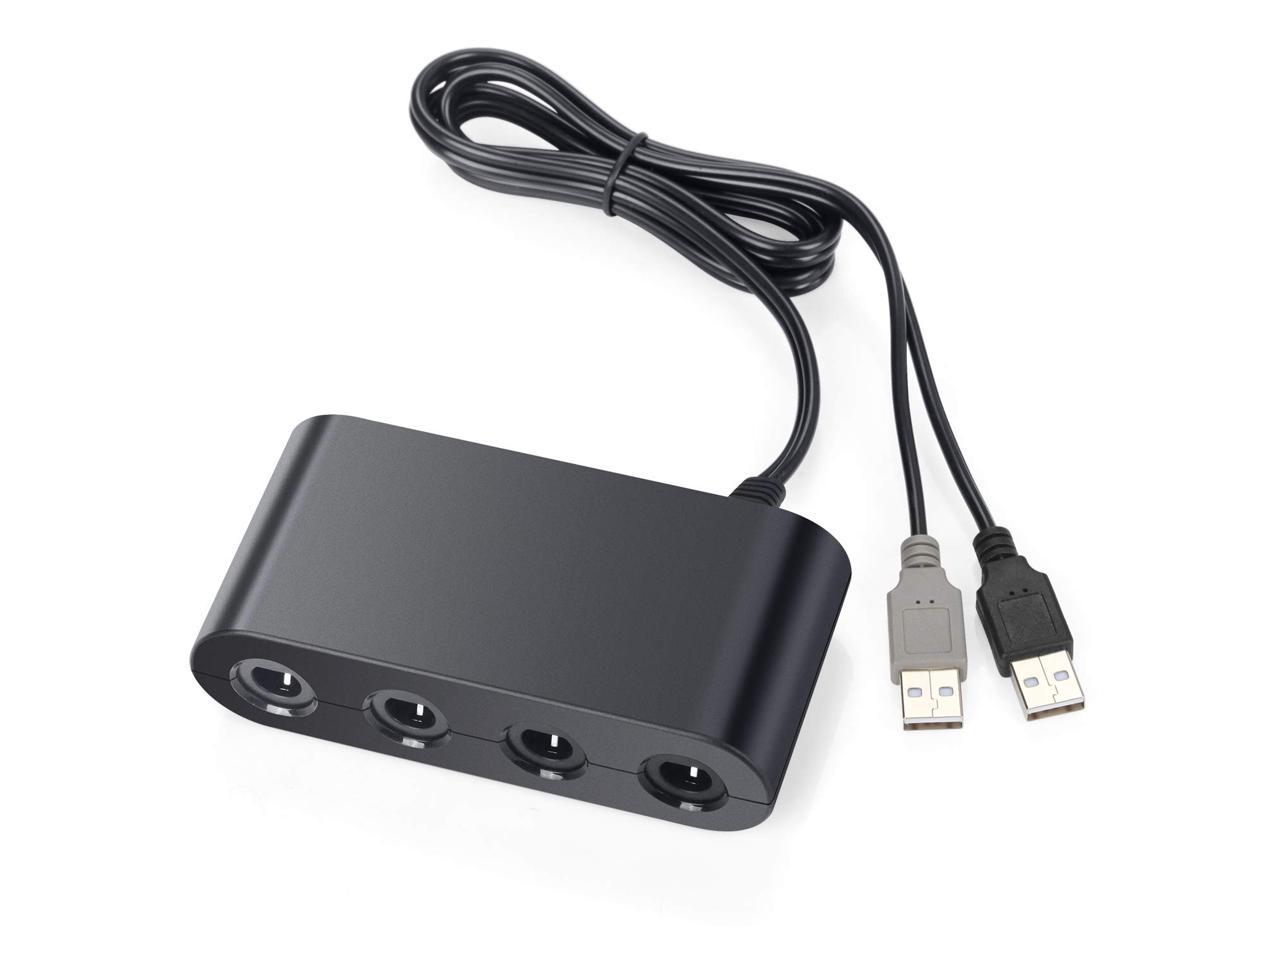 Gamecube Controller Adapter For Nintendo Switch Wii U Pc Super Smash Ultimat 4 Ports 19 Version With Turbo Mode No Driver Needed Provide Best Super Smash Bros Game Switch Newegg Com